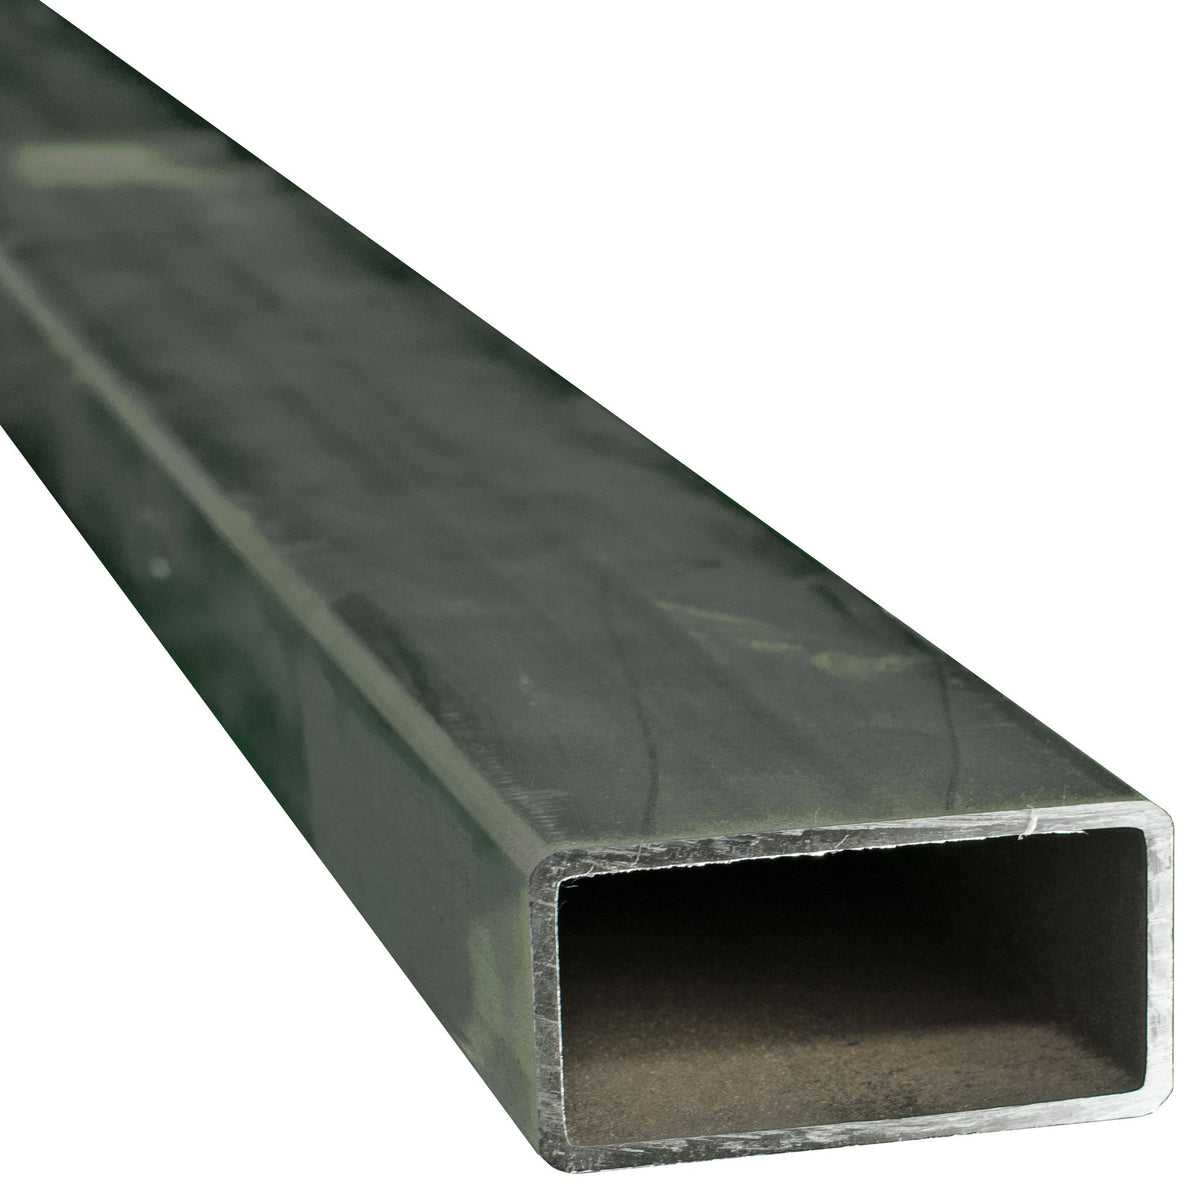 Rectantular Steel Metal Tubes available for purchase from leedisplay.com